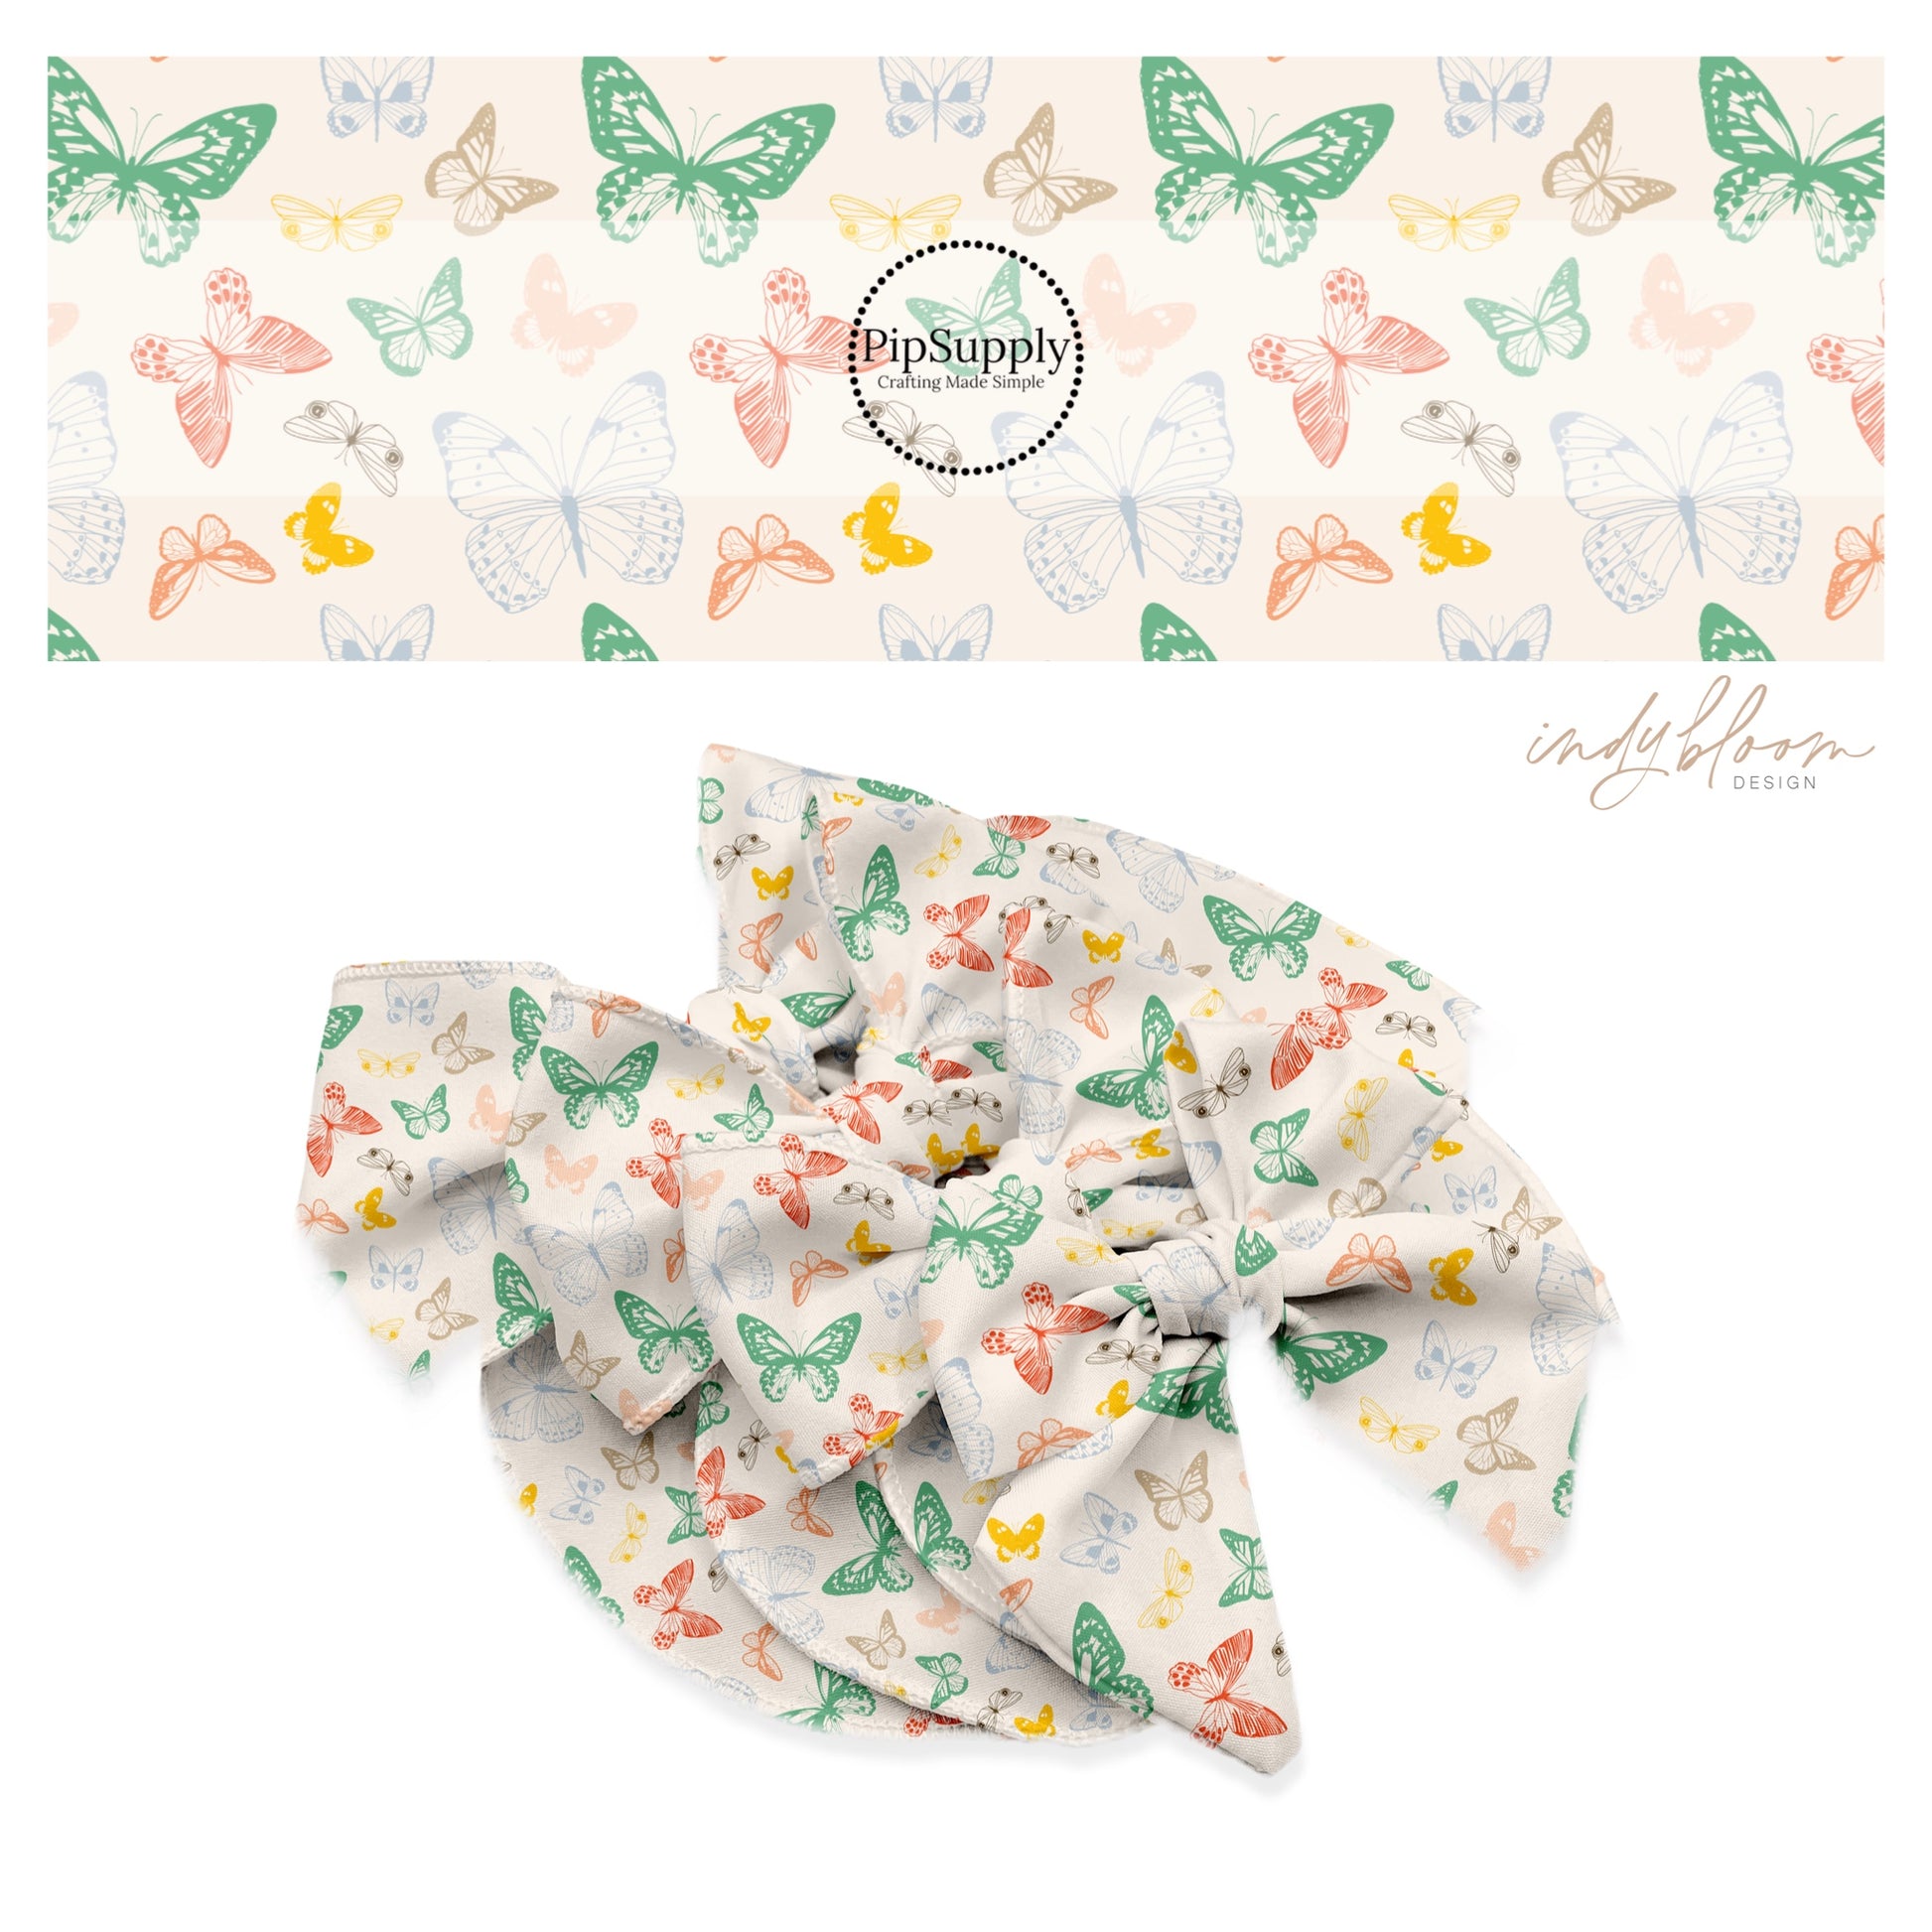 Green, red, blue, yellow, and tan flying butterflies on cream bow strips